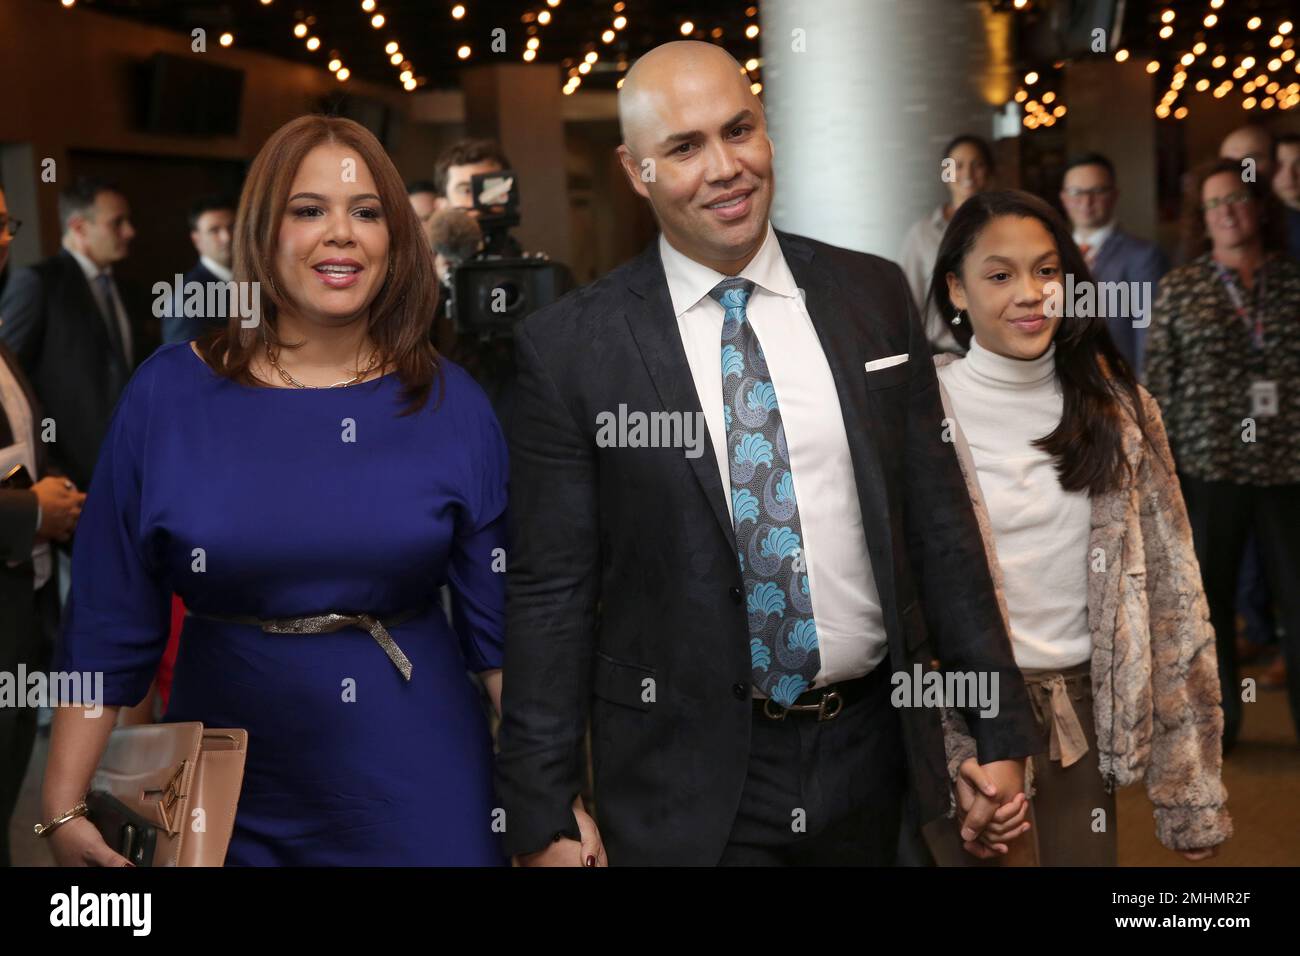 New York Mets new manager Carlos Beltran arrives at an introductory  baseball news conference with his family, including his wife Jessica Beltran,  left, at Citi Field, Monday, Nov. 4, 2019, in New